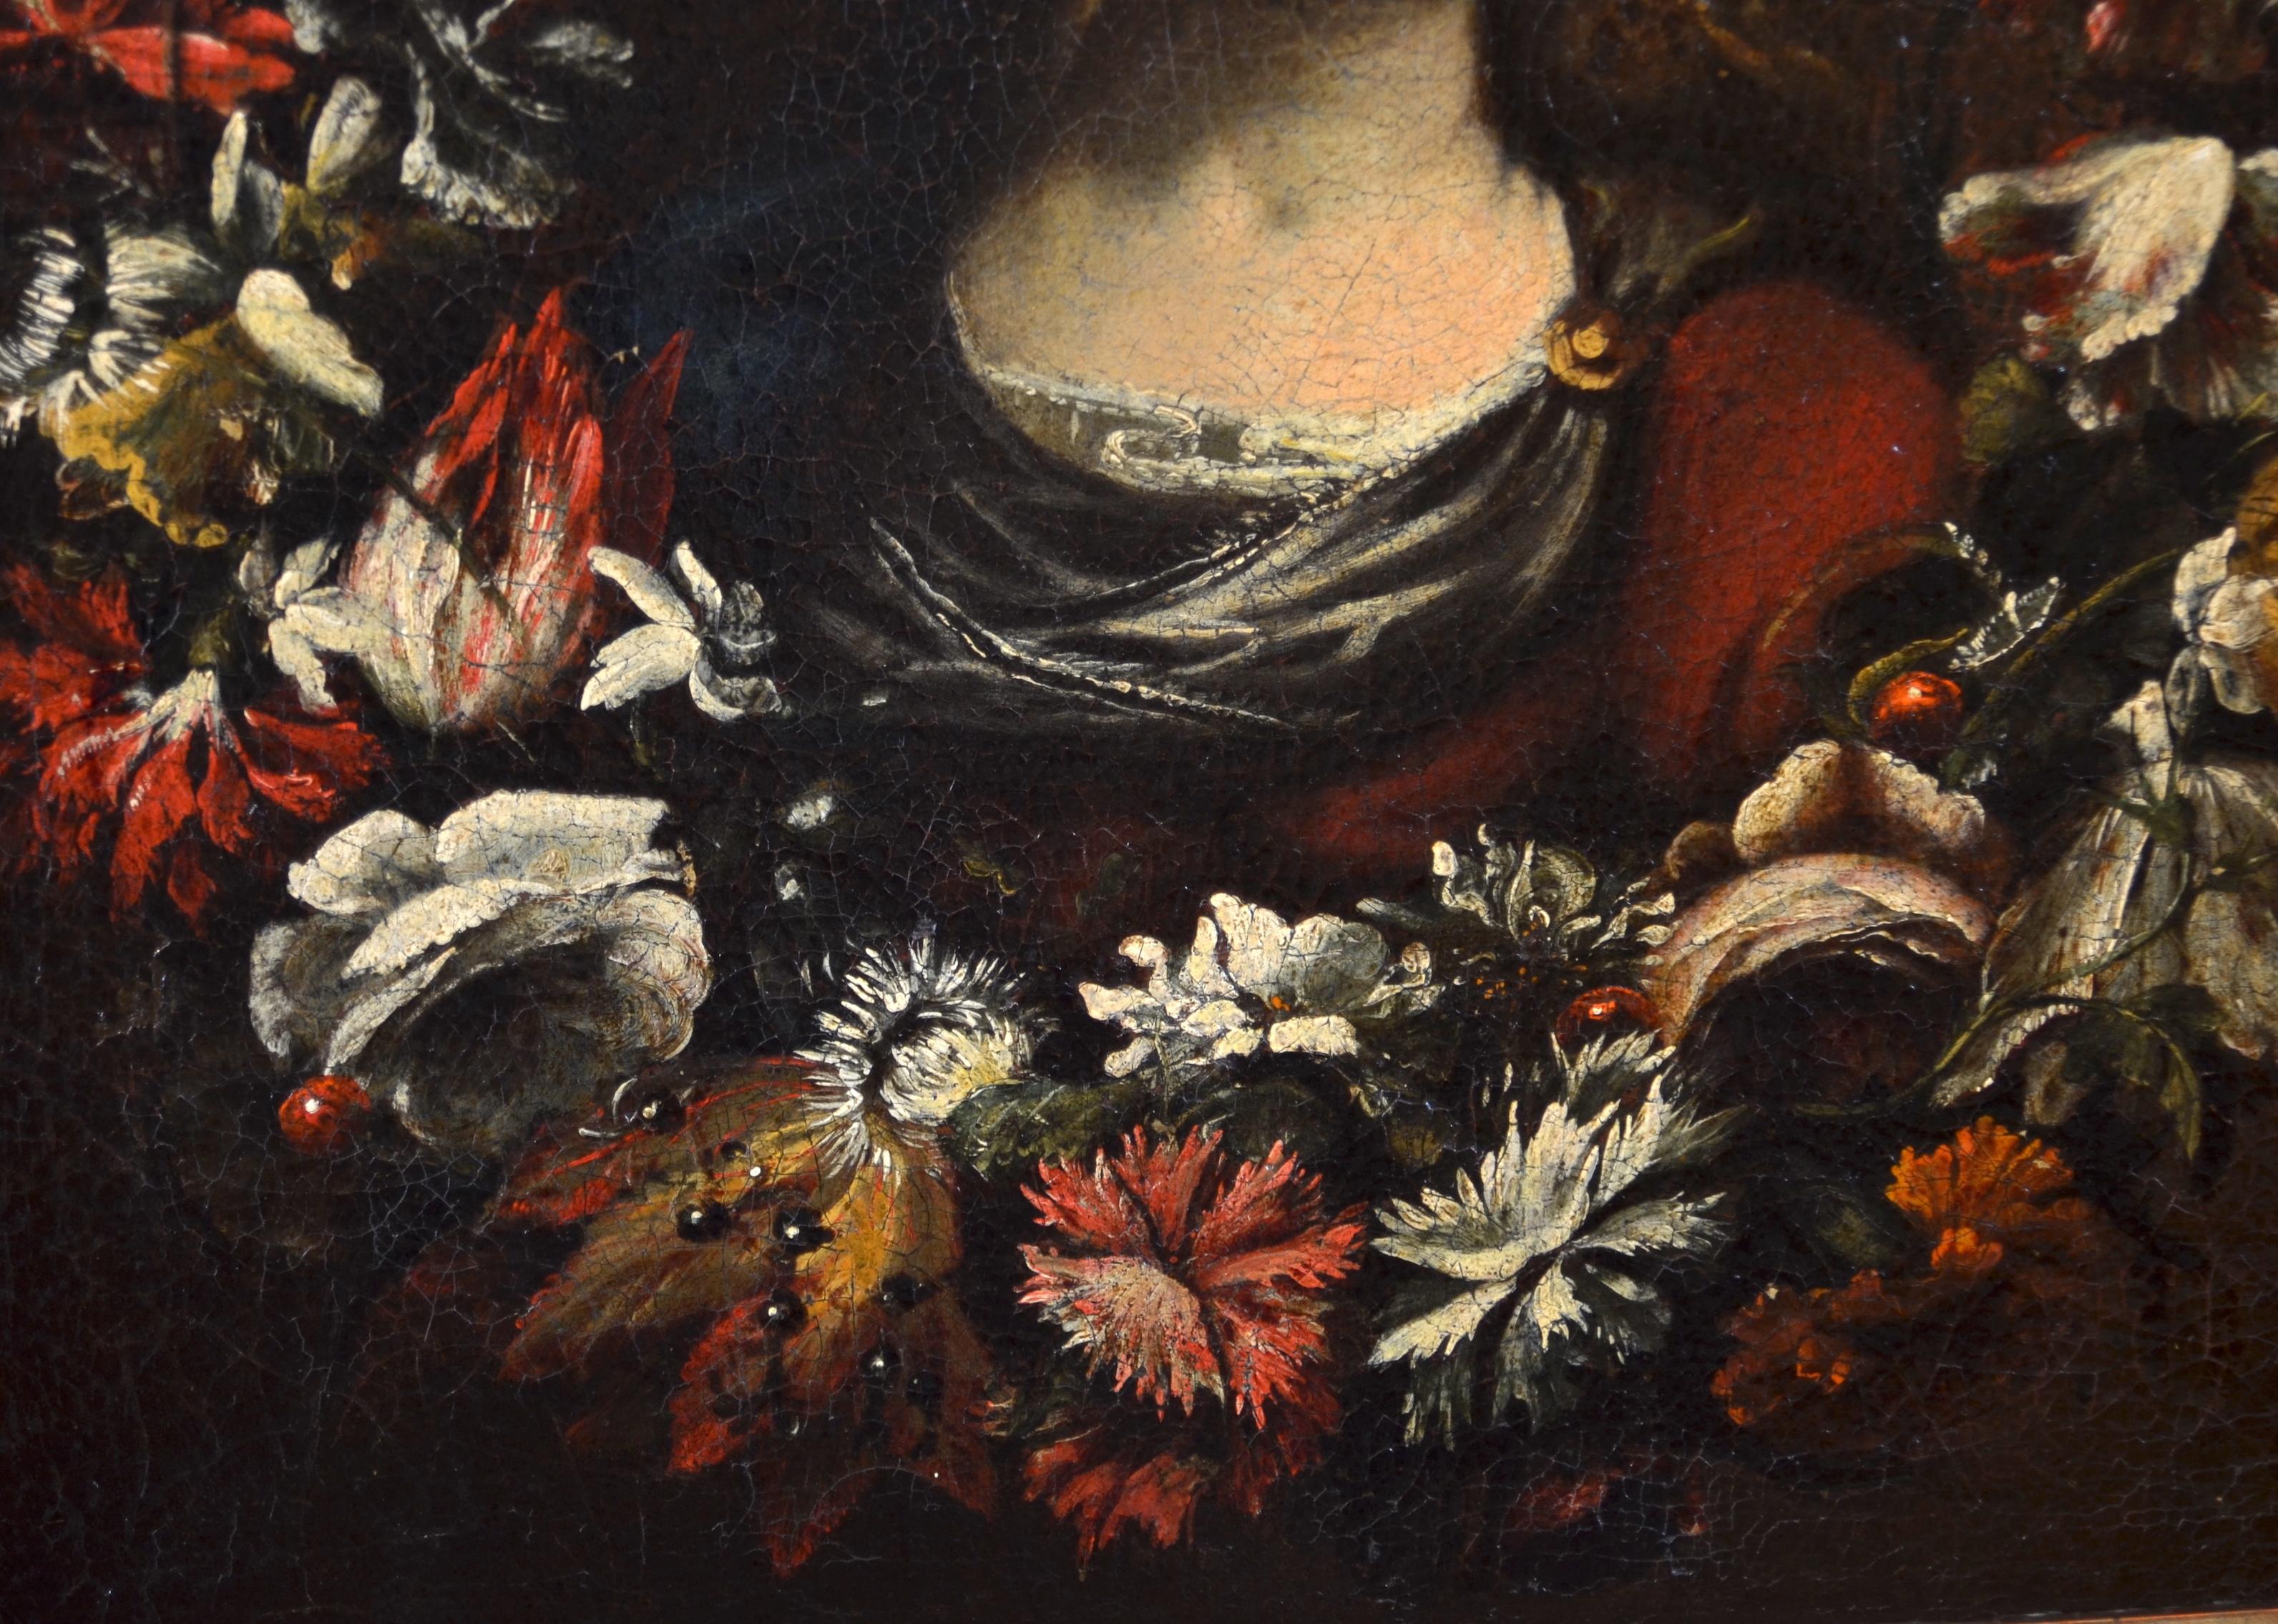 Flower Garland Virgin Paint Oil on canvas Old master 17th Century Italy - Old Masters Painting by Giovanni Stanchi